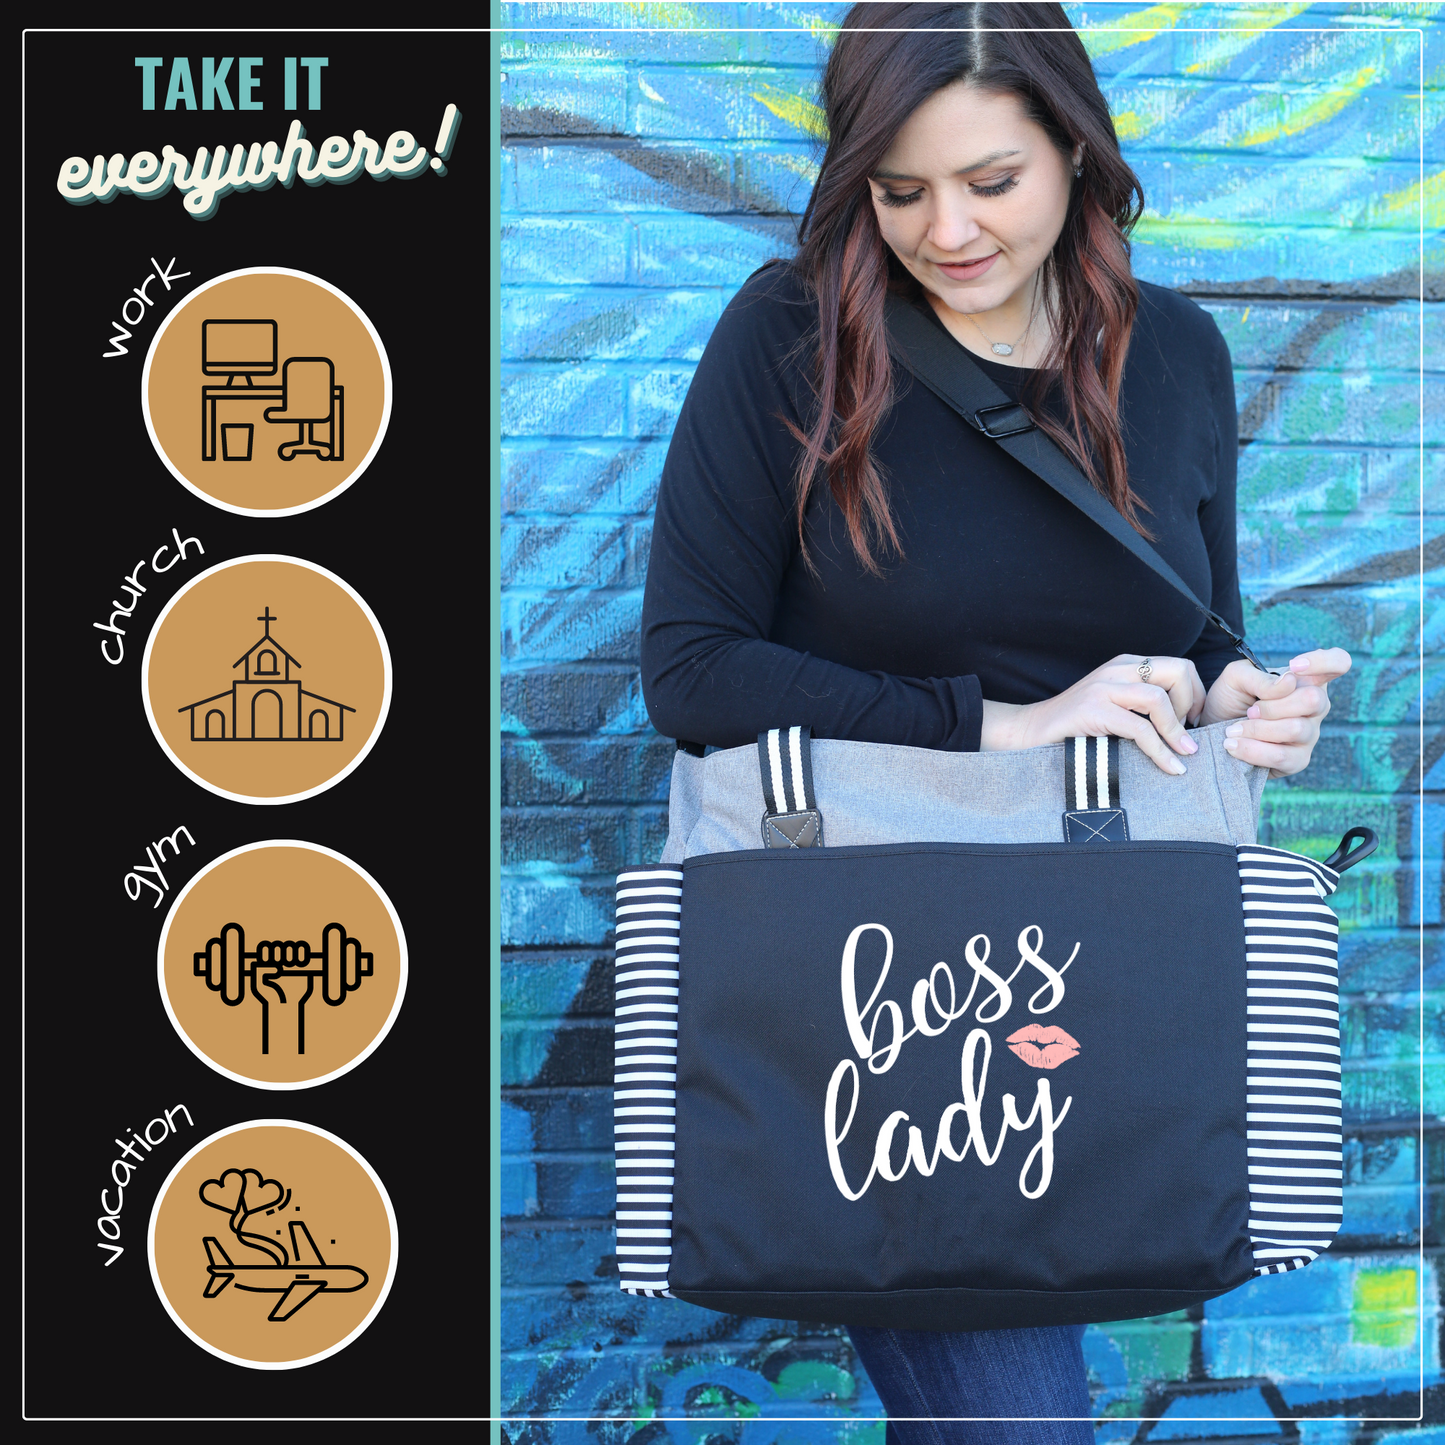 Boss Lady LouLou Gray Tote Bag for Bosses